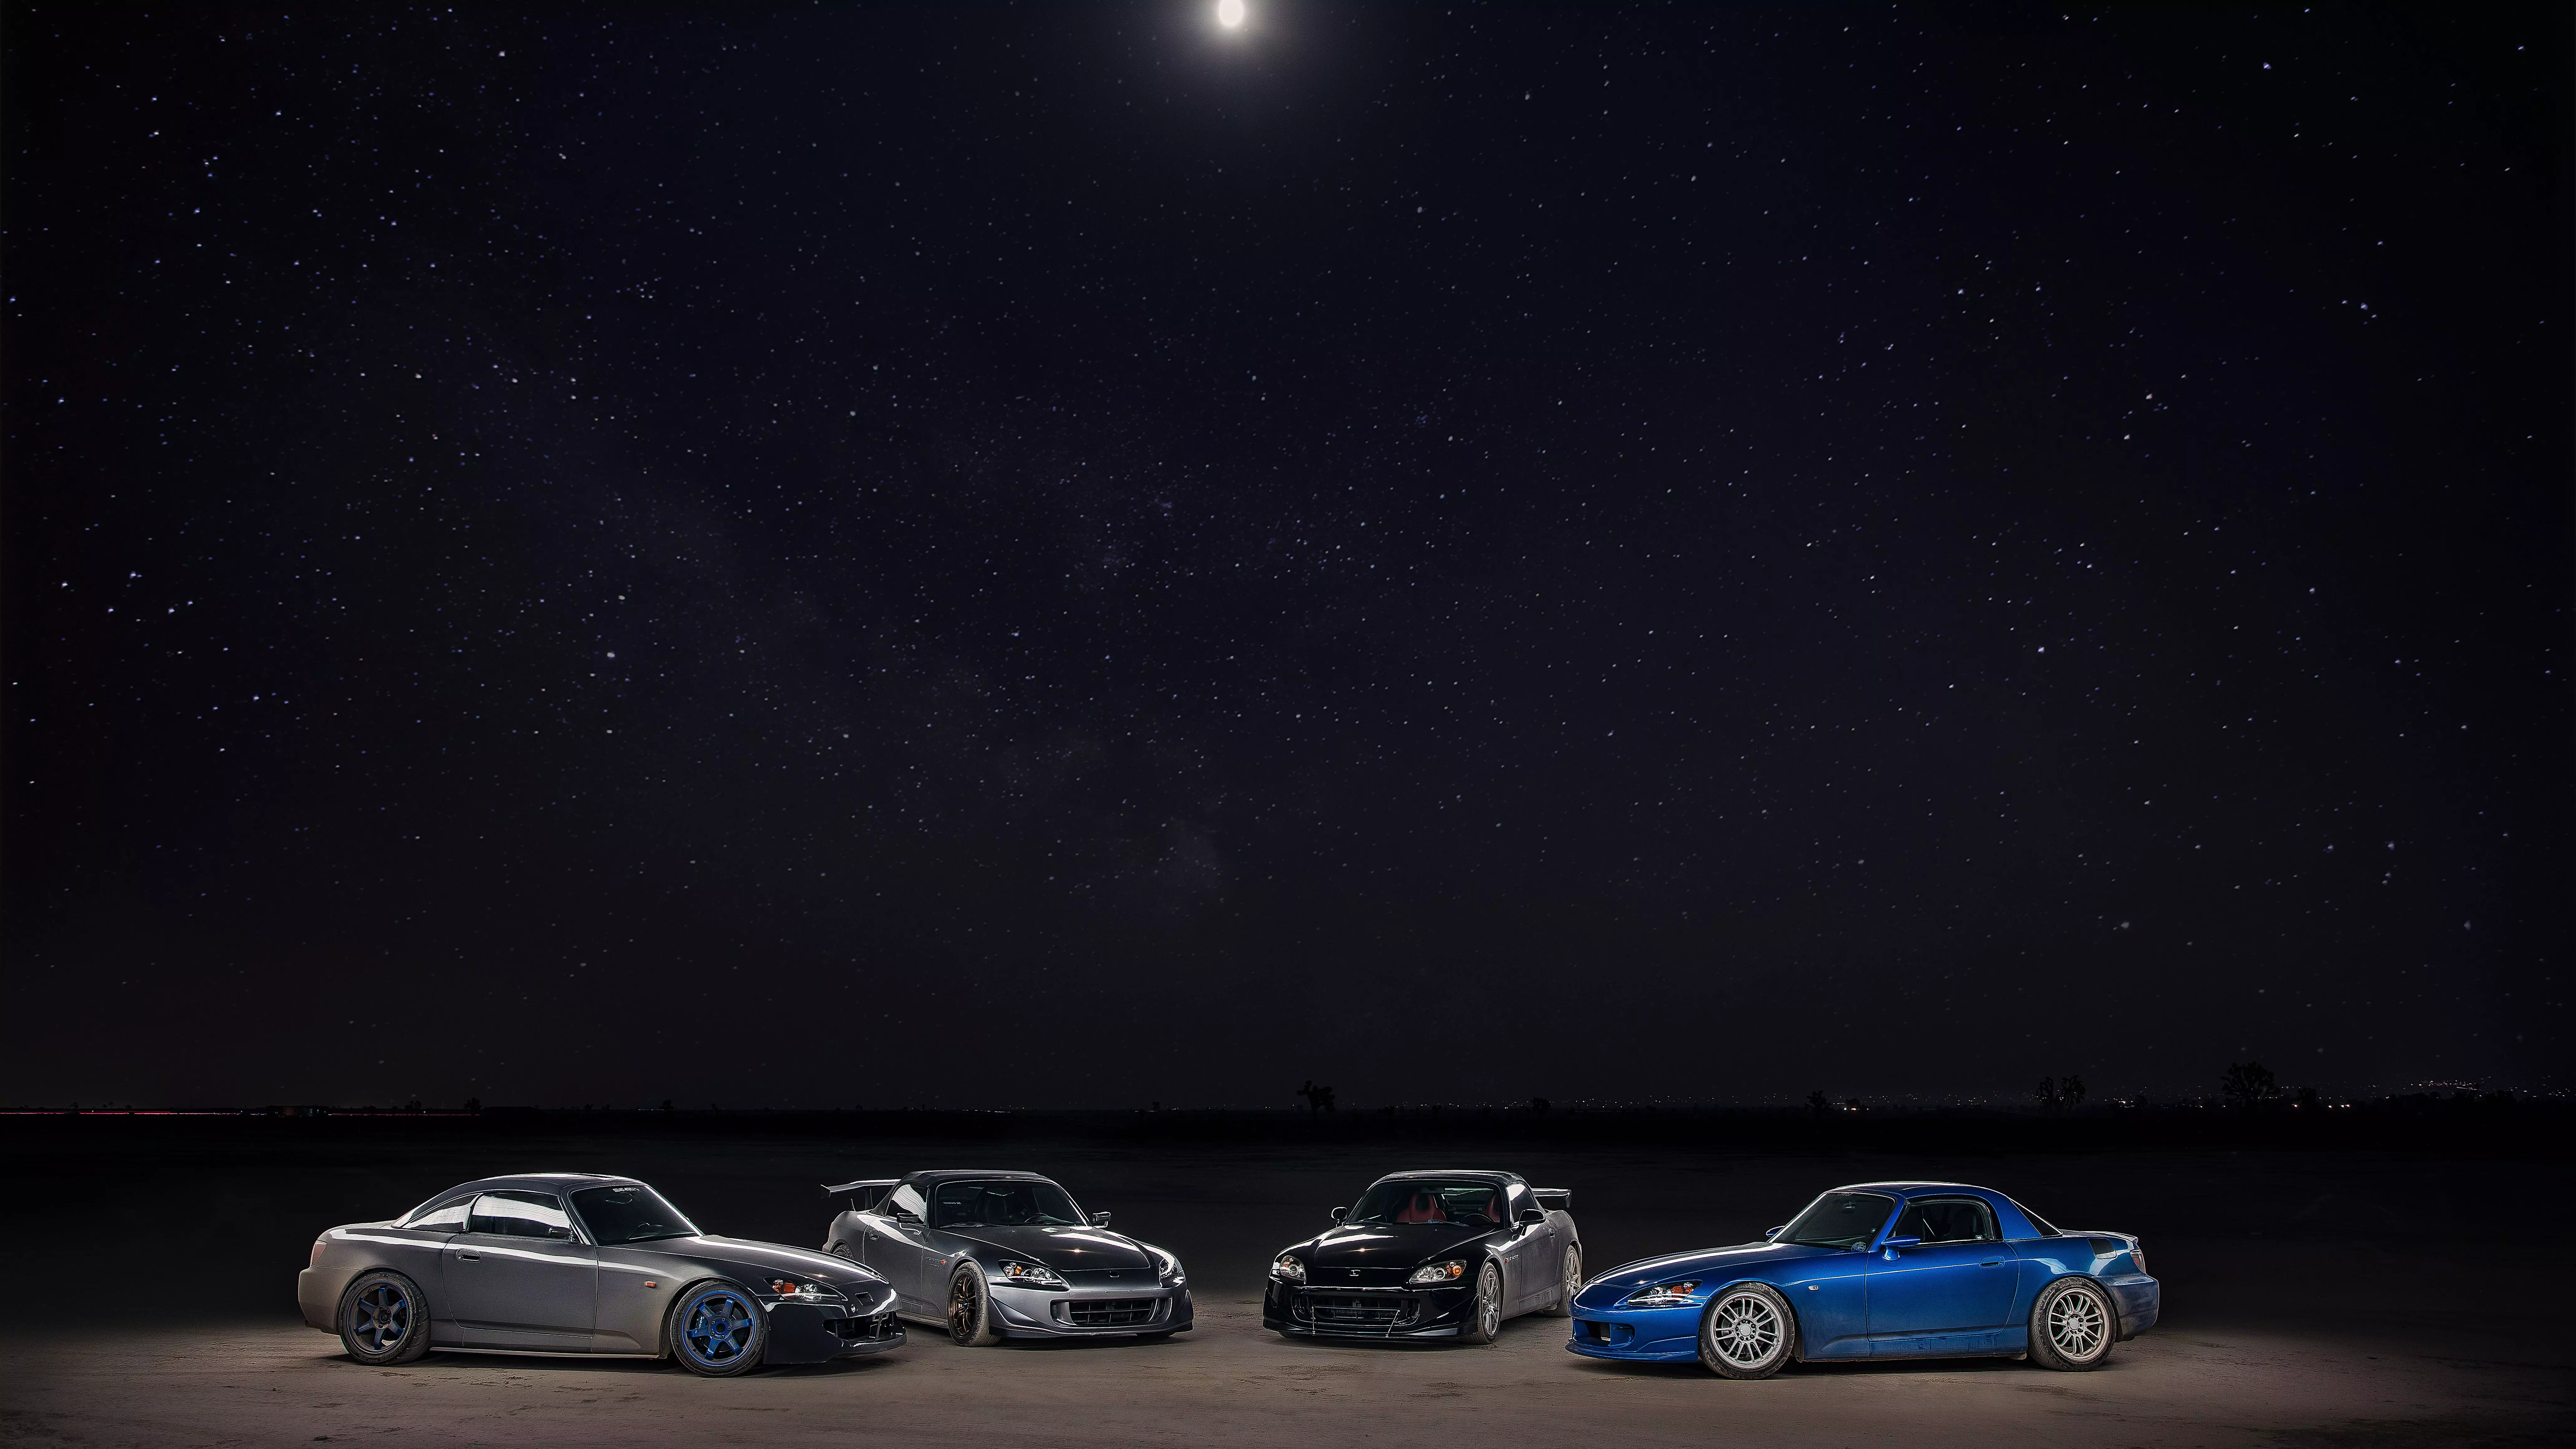 Check Out The Moonlight On This Secret Council Of S2000s